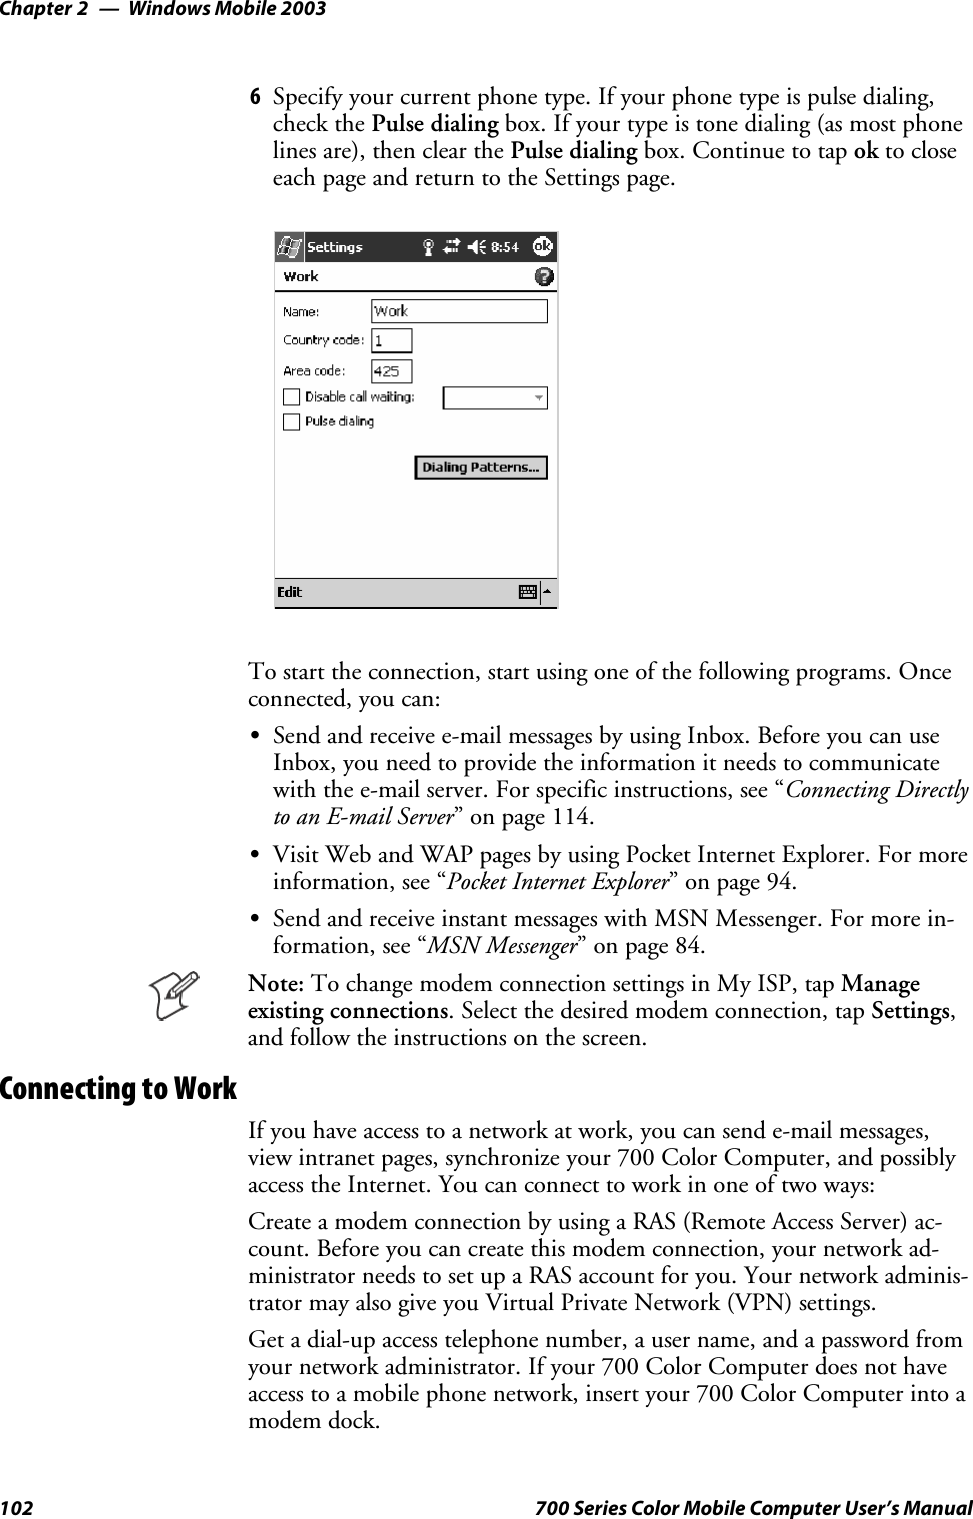 Windows Mobile 2003Chapter —2102 700 Series Color Mobile Computer User’s Manual6Specify your current phone type. If your phone type is pulse dialing,check the Pulse dialing box. If your type is tone dialing (as most phonelines are), then clear the Pulse dialing box. Continue to tap ok to closeeach page and return to the Settings page.To start the connection, start using one of the following programs. Onceconnected, you can:SSend and receive e-mail messages by using Inbox. Before you can useInbox, you need to provide the information it needs to communicatewith the e-mail server. For specific instructions, see “Connecting Directlyto an E-mail Server” on page 114.SVisit Web and WAP pages by using Pocket Internet Explorer. For moreinformation, see “Pocket Internet Explorer” on page 94.SSend and receive instant messages with MSN Messenger. For more in-formation, see “MSN Messenger” on page 84.Note: To change modem connection settings in My ISP, tap Manageexisting connections. Select the desired modem connection, tap Settings,and follow the instructions on the screen.Connecting to WorkIf you have access to a network at work, you can send e-mail messages,view intranet pages, synchronize your 700 Color Computer, and possiblyaccess the Internet. You can connect to work in one of two ways:Create a modem connection by using a RAS (Remote Access Server) ac-count. Before you can create this modem connection, your network ad-ministrator needs to set up a RAS account for you. Your network adminis-trator may also give you Virtual Private Network (VPN) settings.Get a dial-up access telephone number, a user name, and a password fromyour network administrator. If your 700 Color Computer does not haveaccess to a mobile phone network, insert your 700 Color Computer into amodem dock.